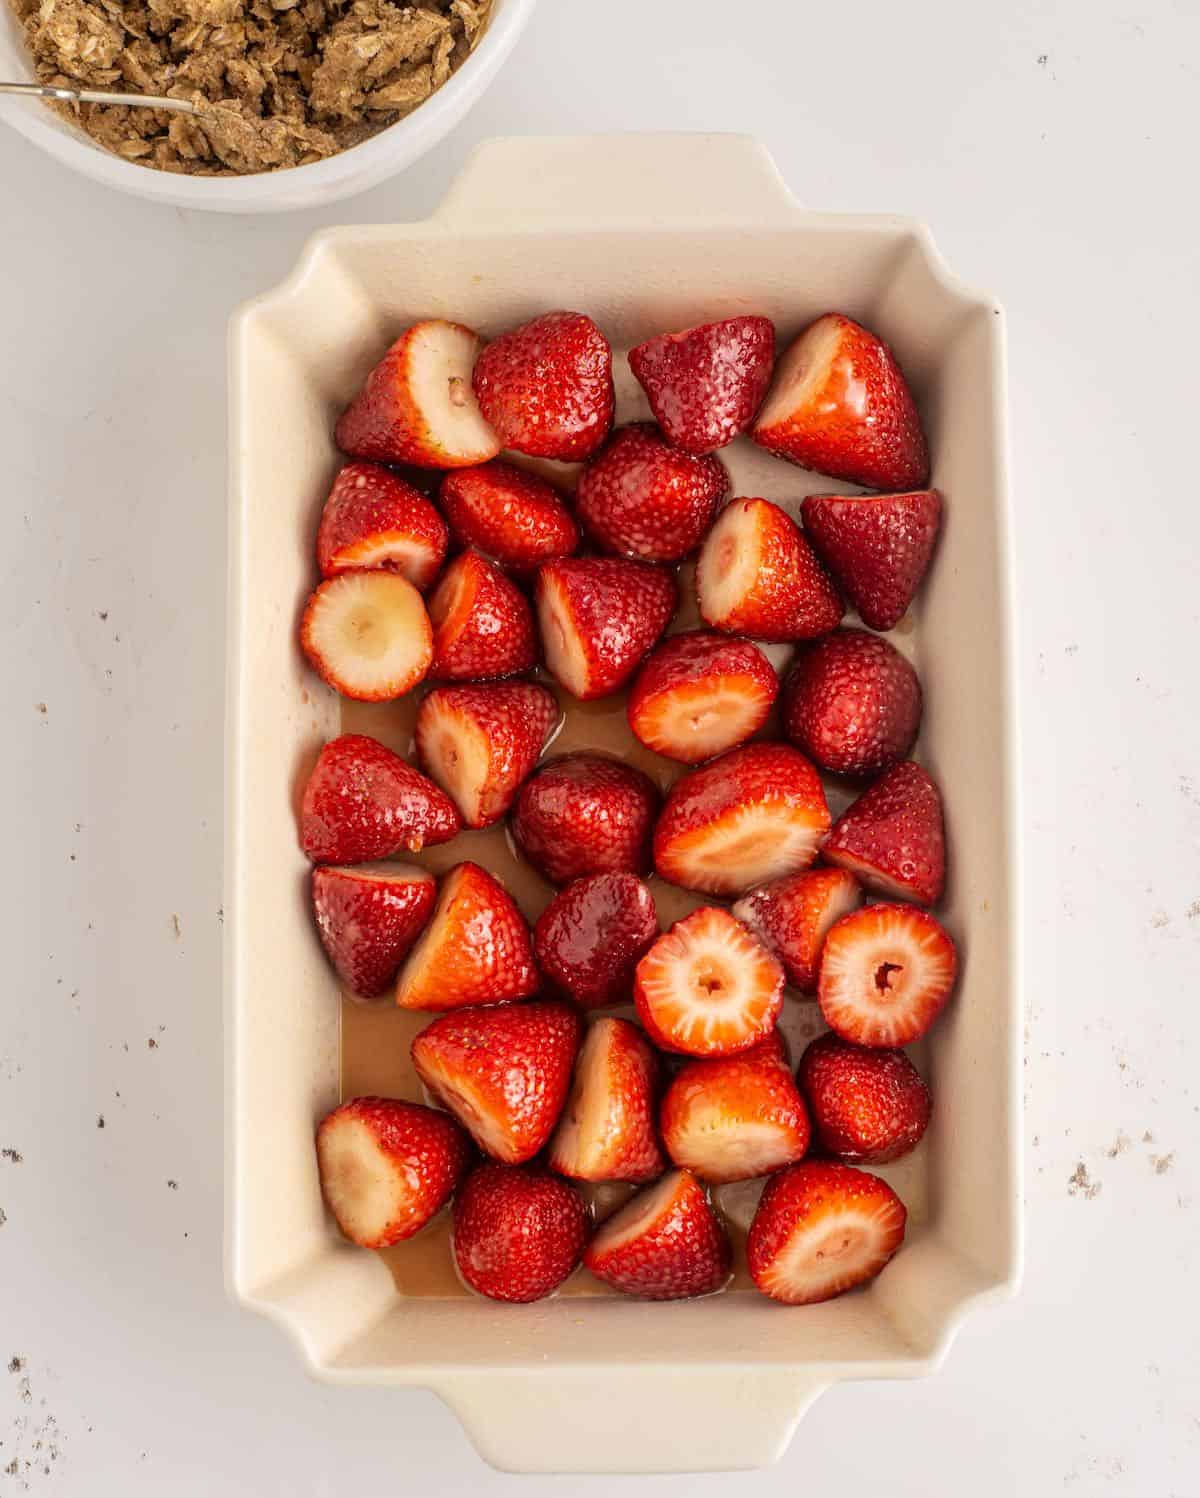 Whole strawberries spread in a baking dish.